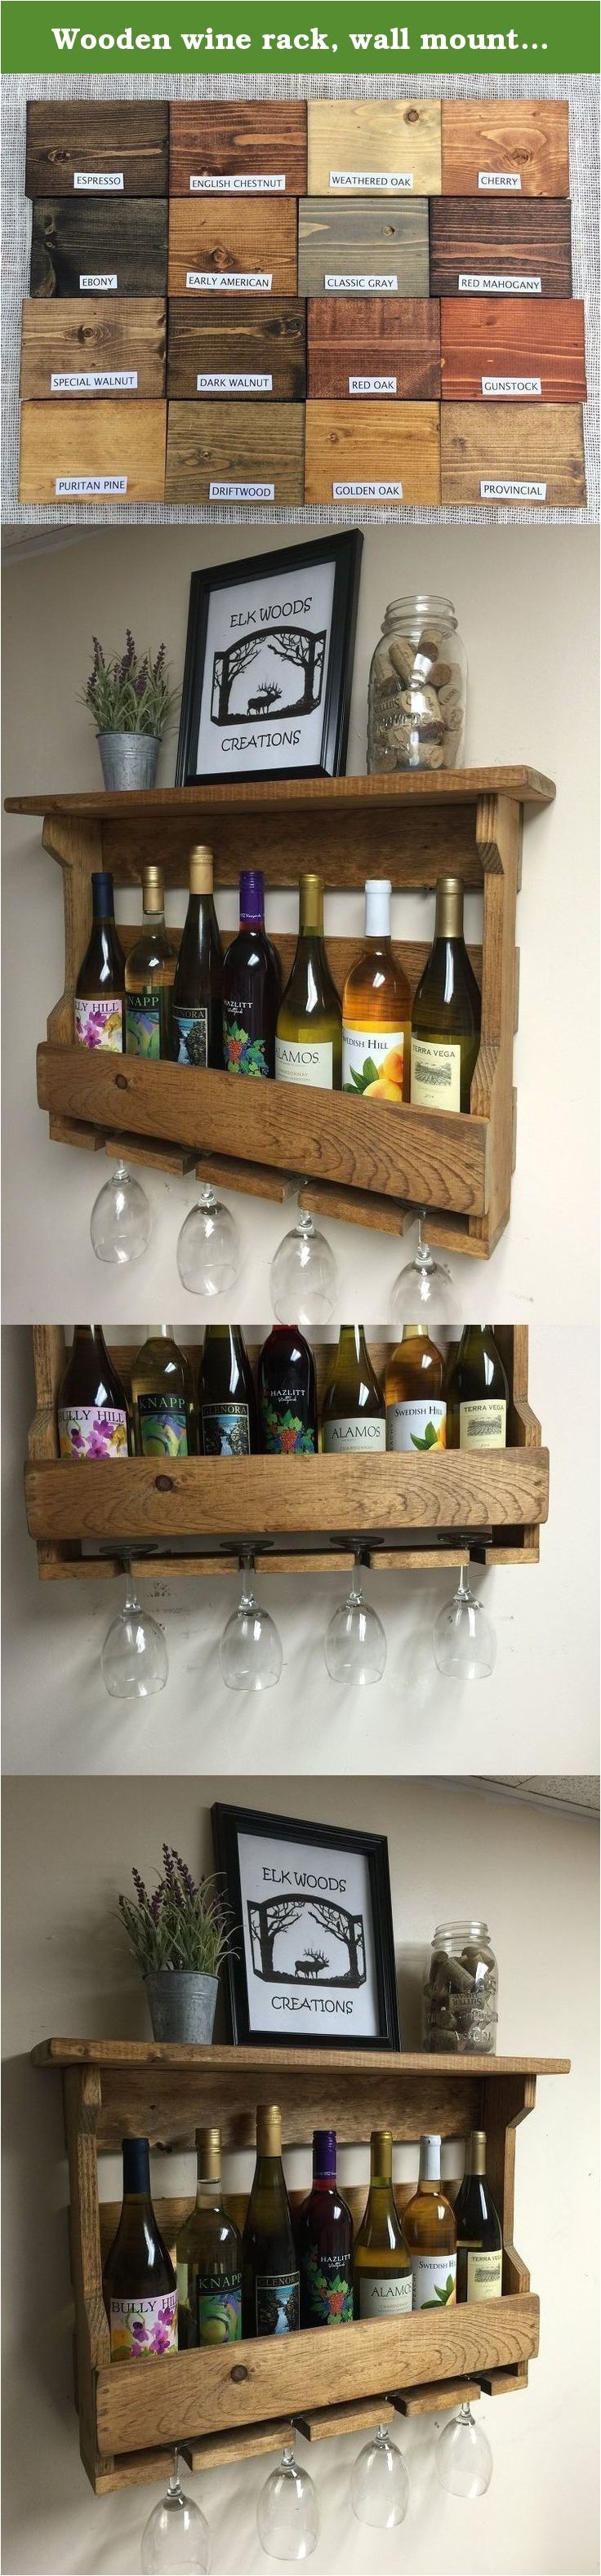 wooden wine rack wall mounted with wine glass rack and display shelf this wine